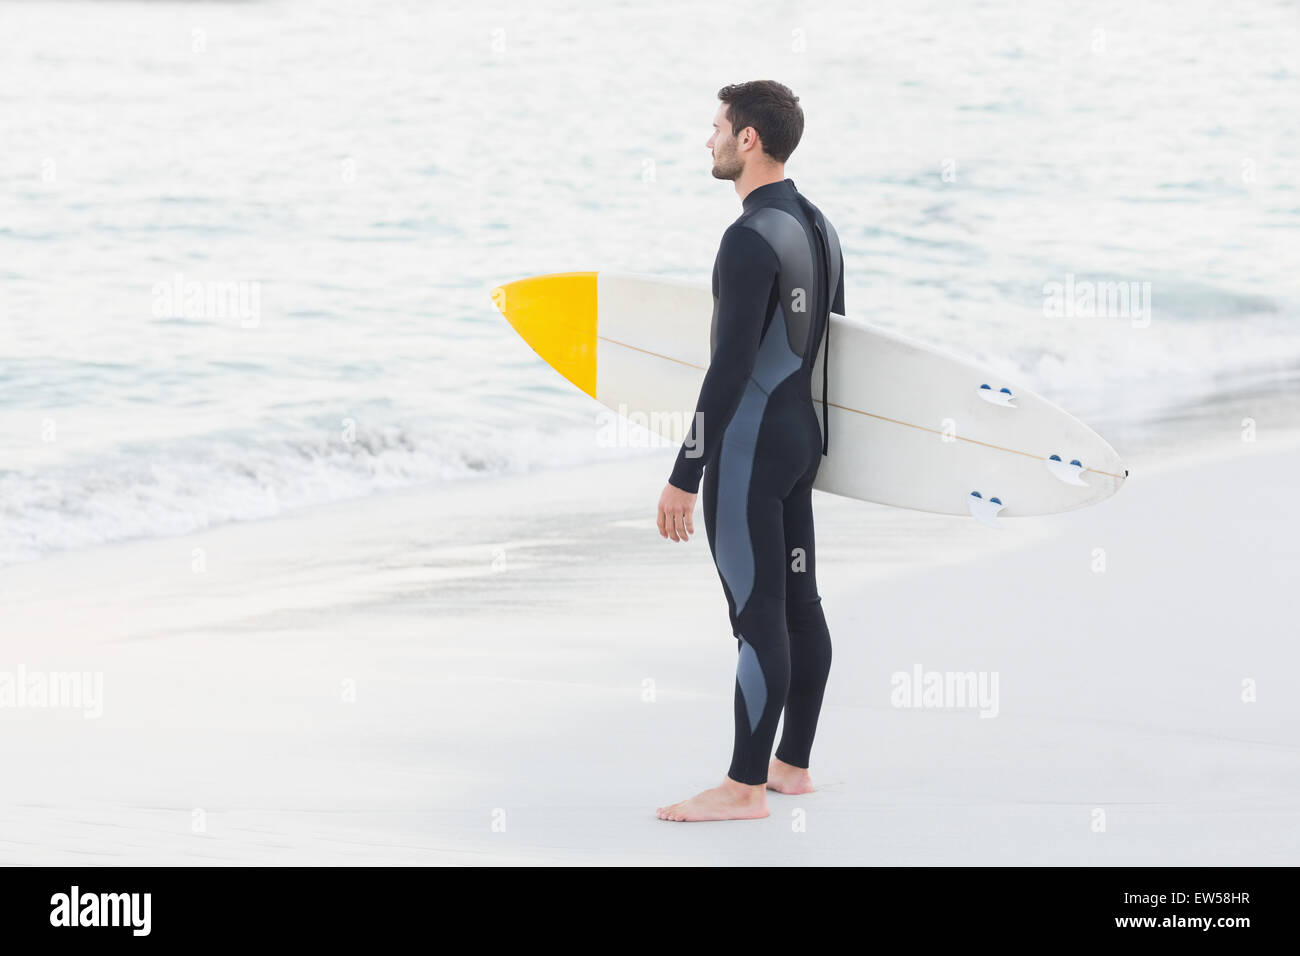 Man in wetsuit with a surfboard on a sunny day Stock Photo